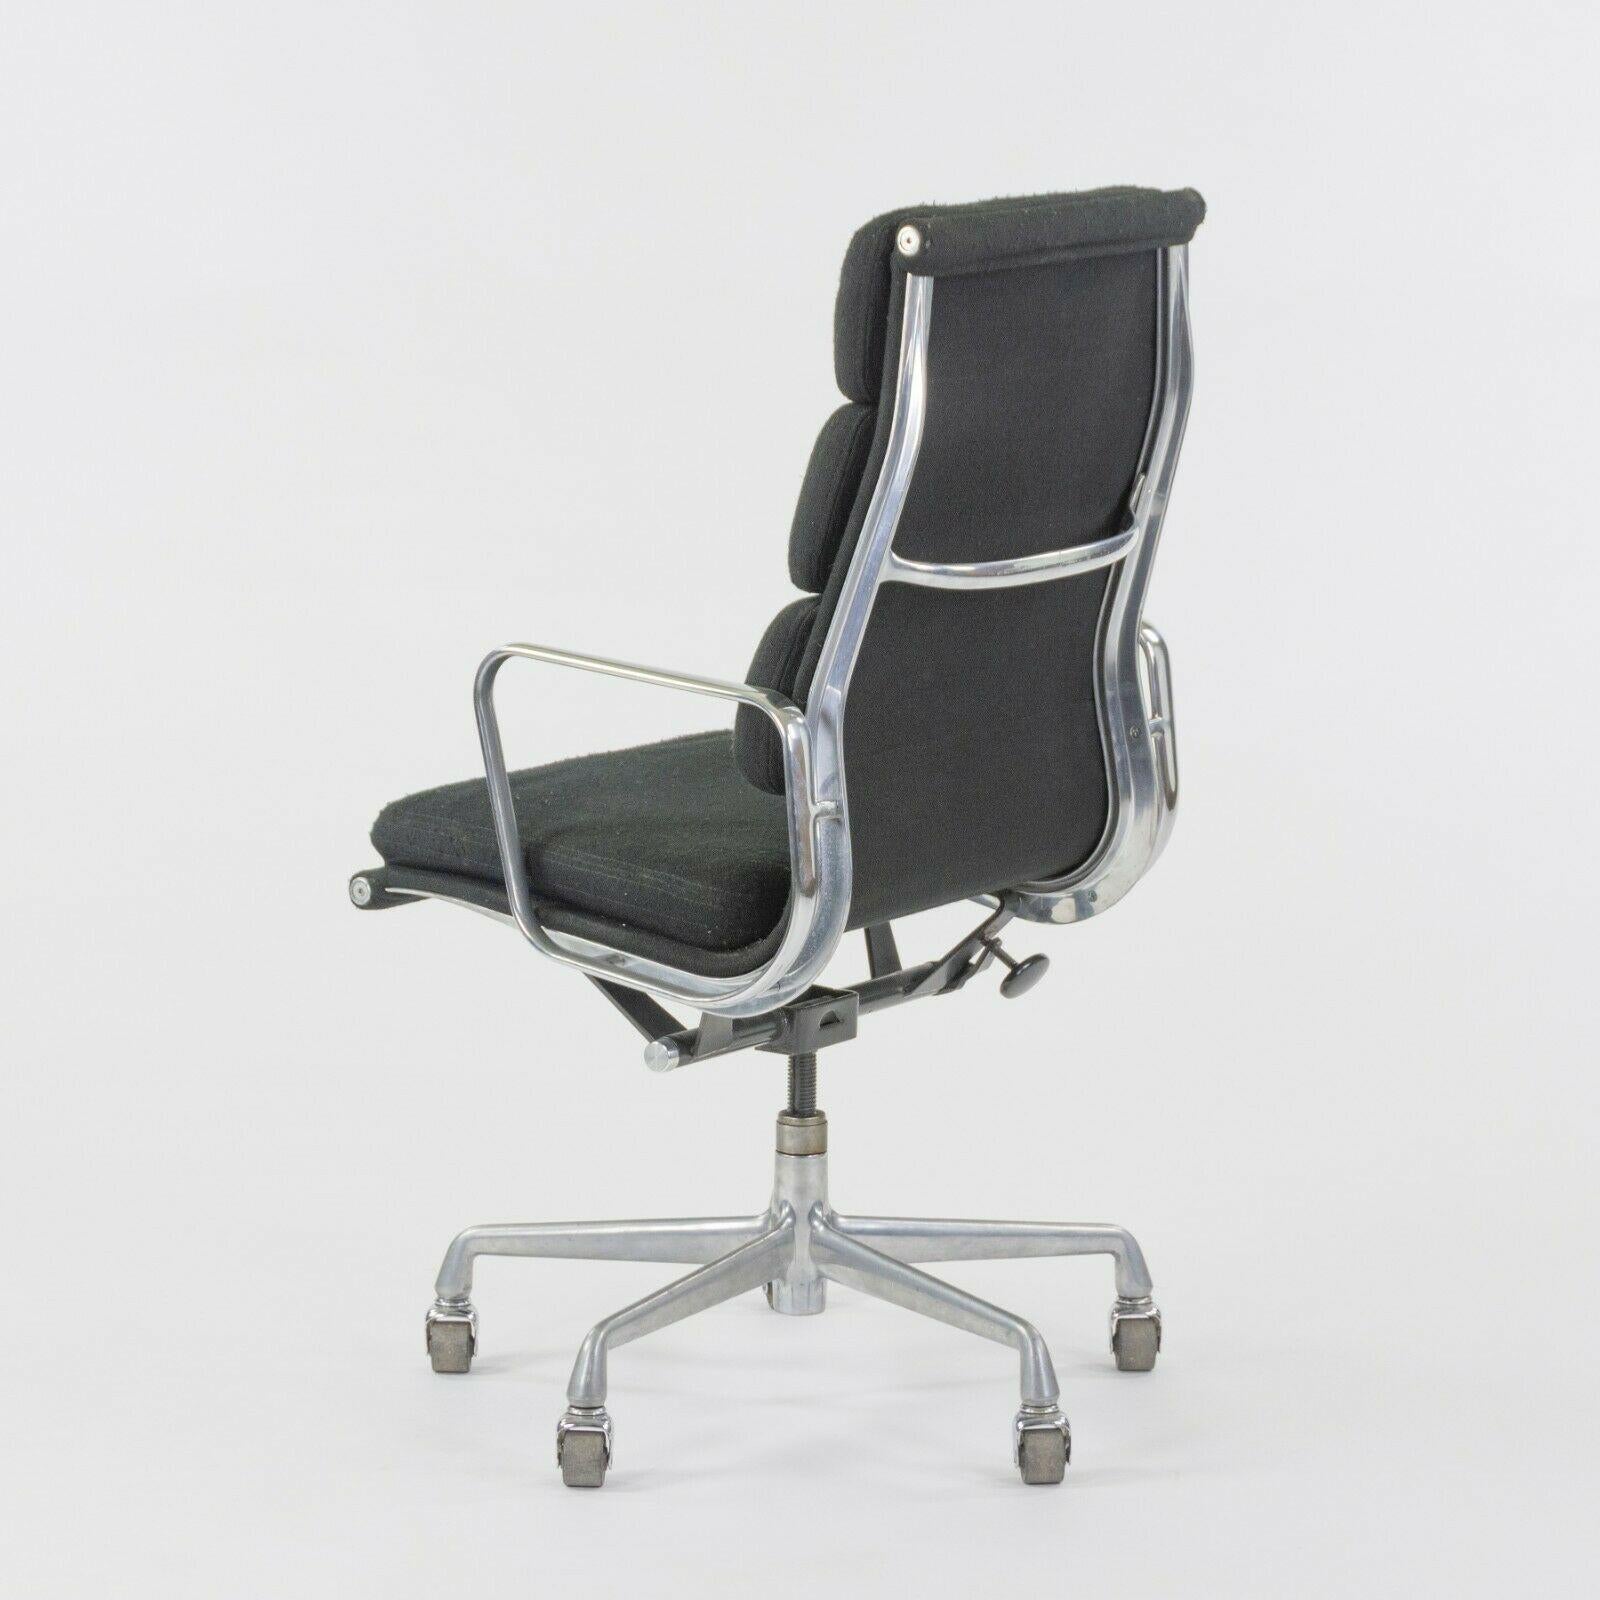 1985 Fabric Herman Miller Eames Aluminum Group Executive High Back Desk Chair In Good Condition For Sale In Philadelphia, PA